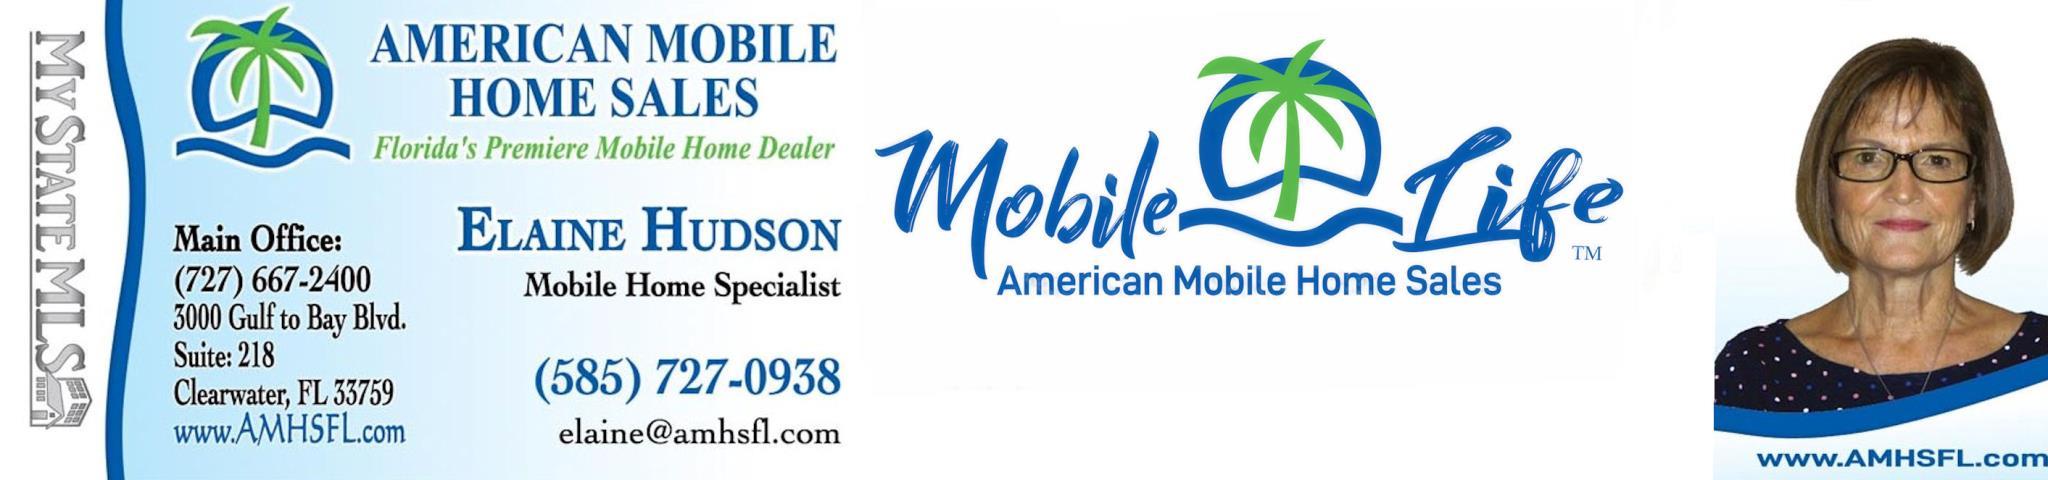 American Mobile Home Sales of Florida